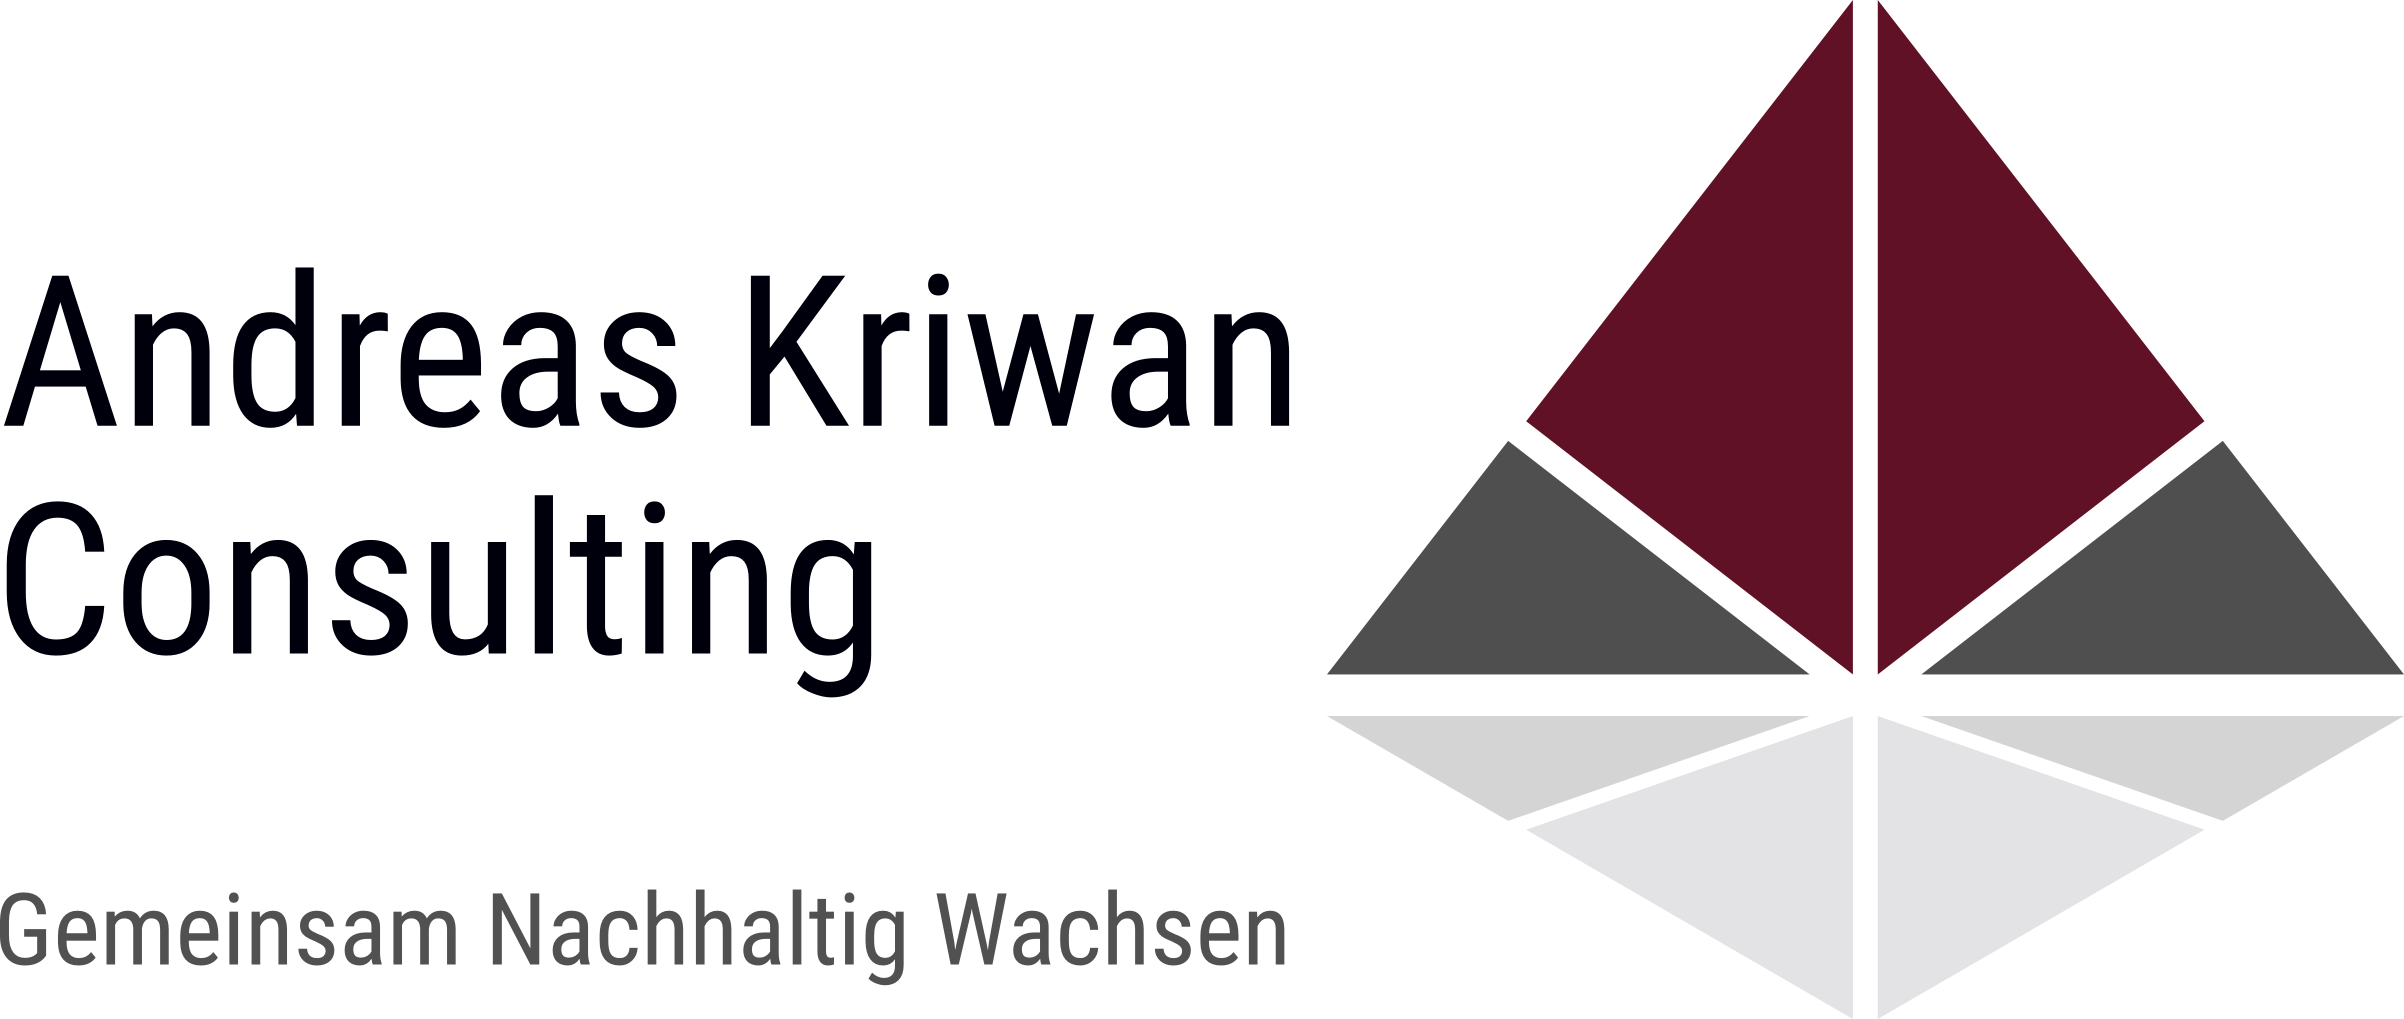 Andreas Kriwan Consulting